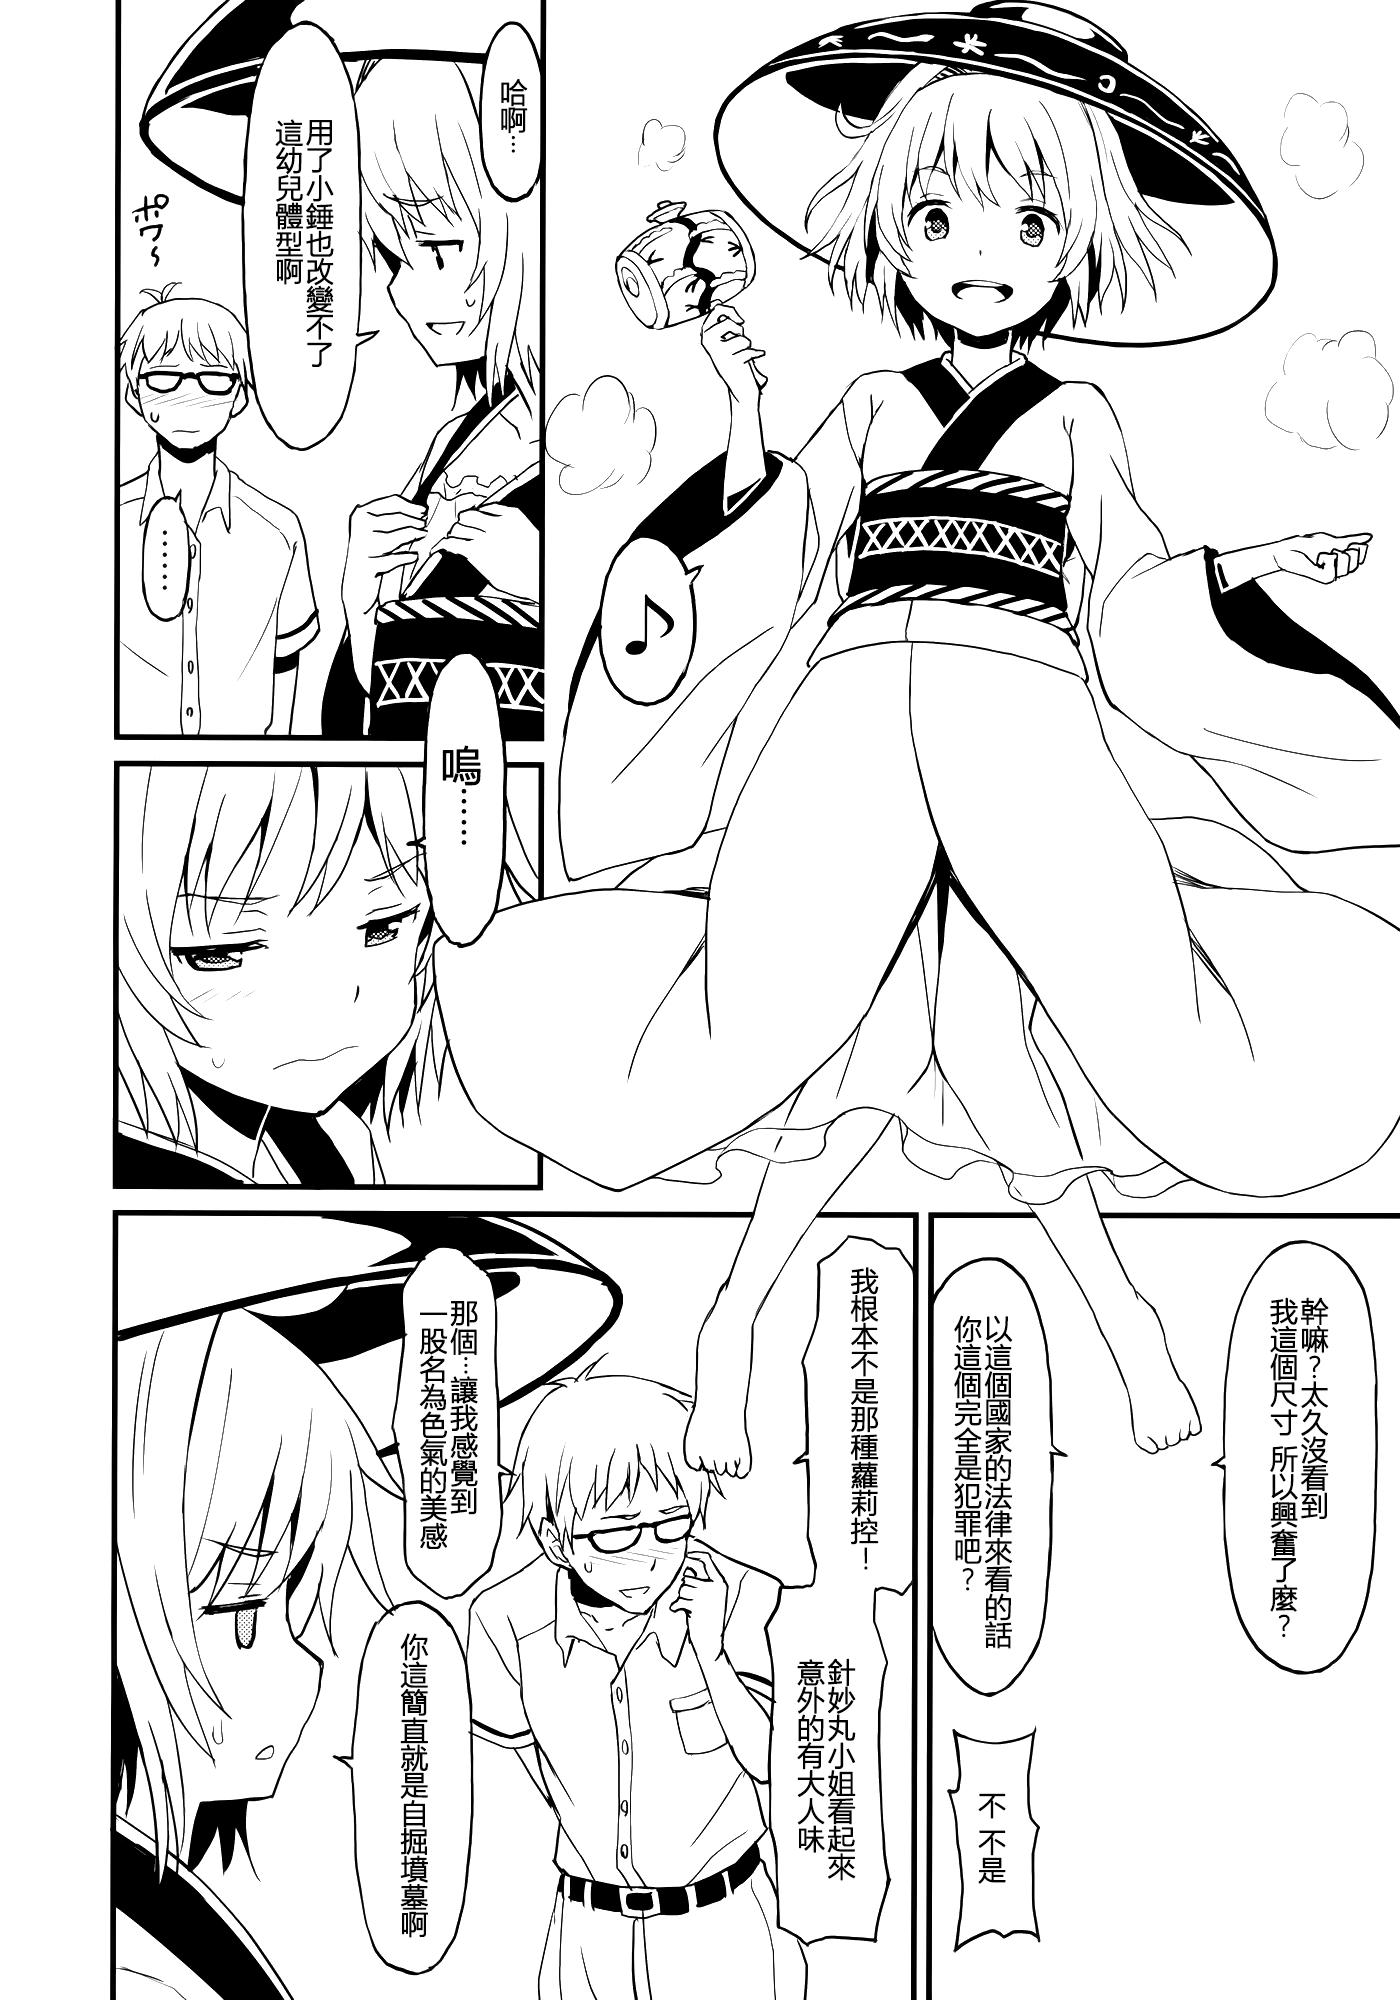 Pale Chiisana Seesaw Lovers - Touhou project Blow Job Contest - Page 6